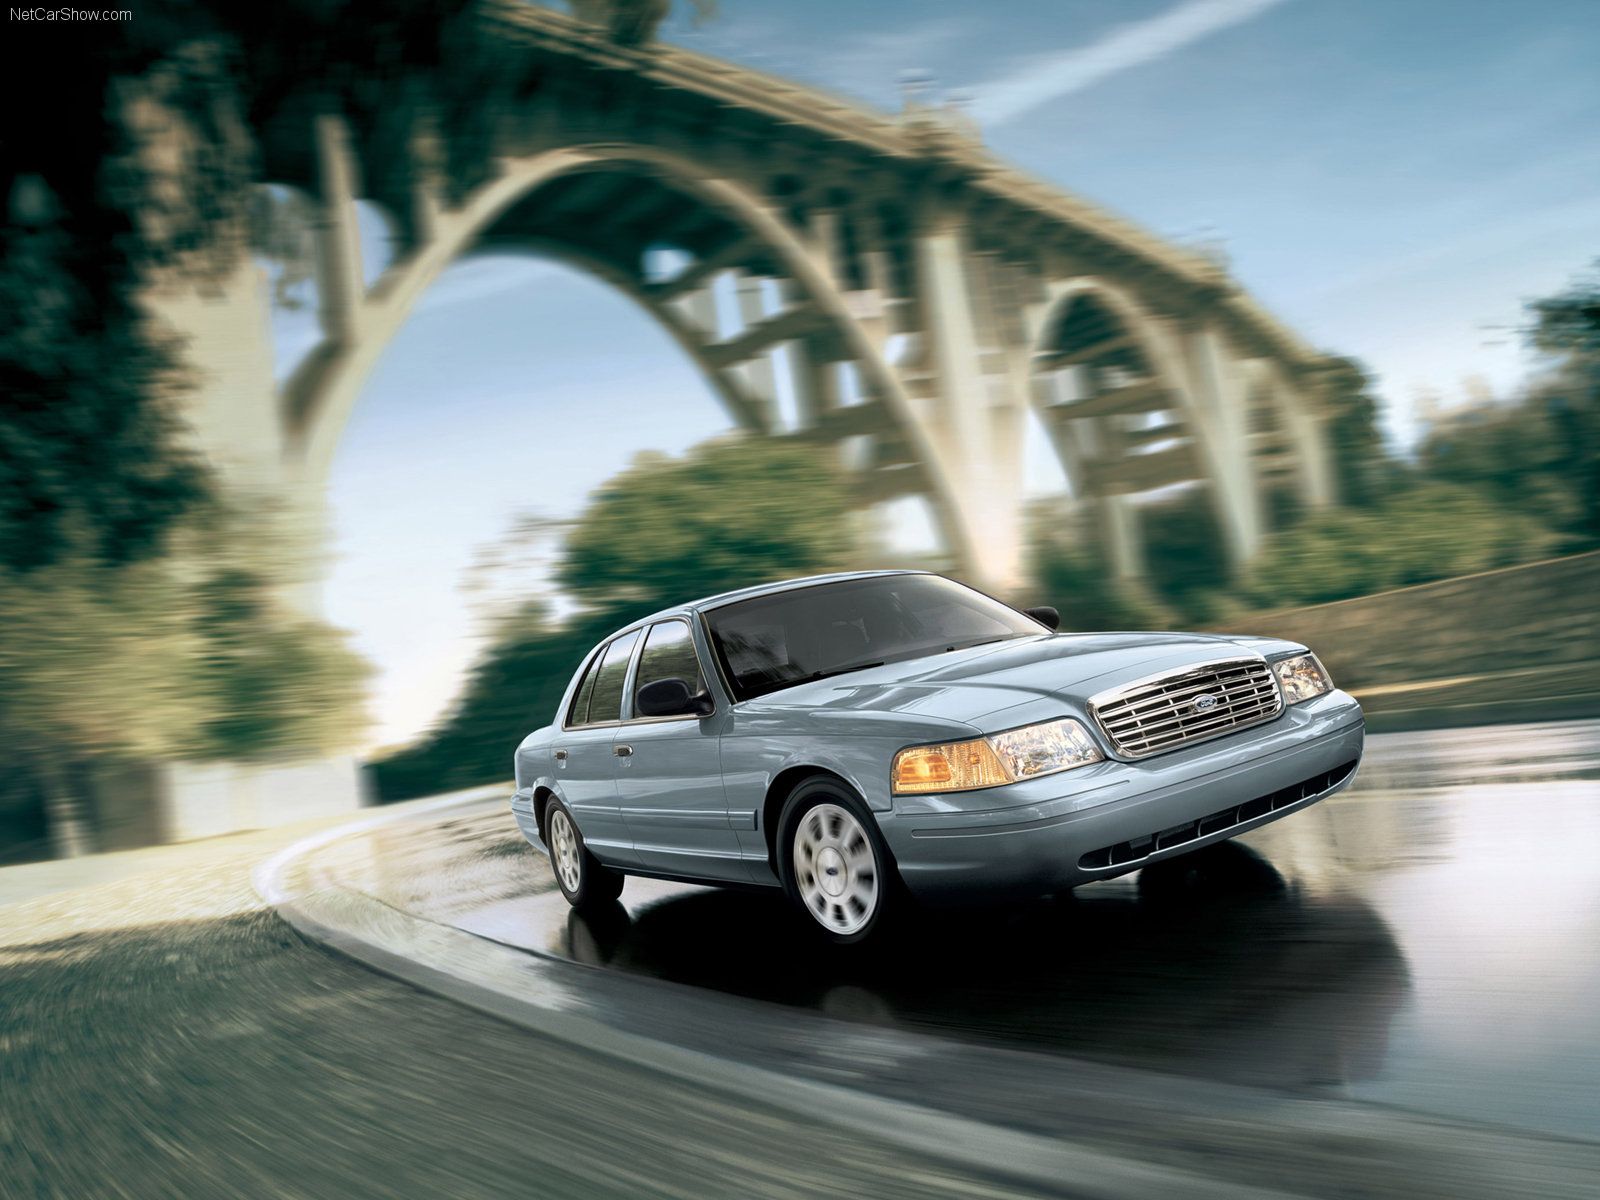 Ford Crown Victoria picture. Ford photo gallery